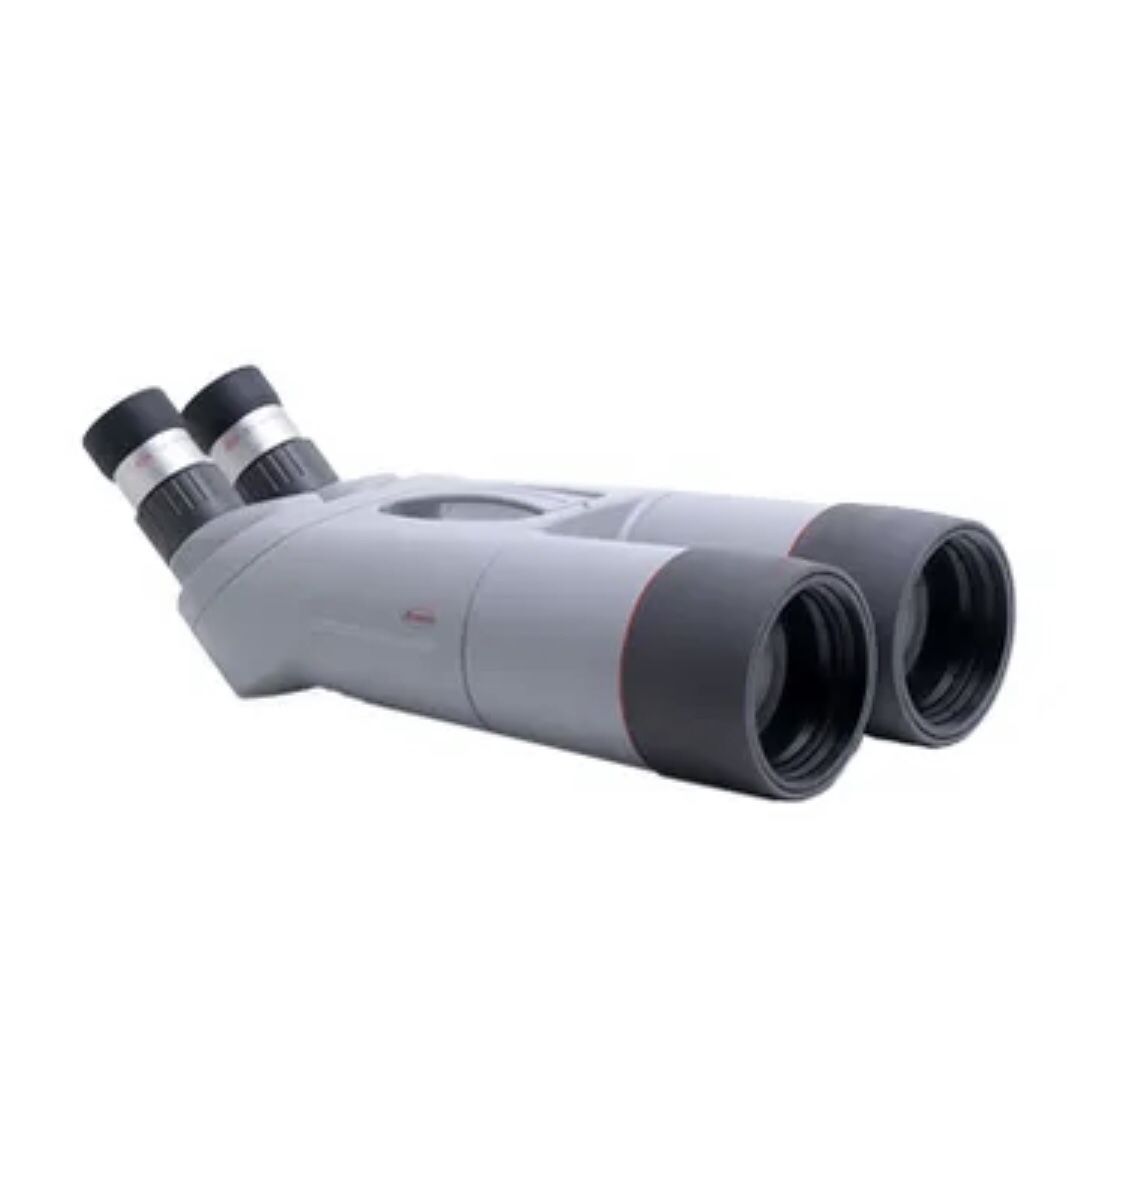 Kowa Highlander 32x82 High Lander Water Proof Porro Prism Binocular With Fluorite Glass And 2.2 Degree Angle Of View